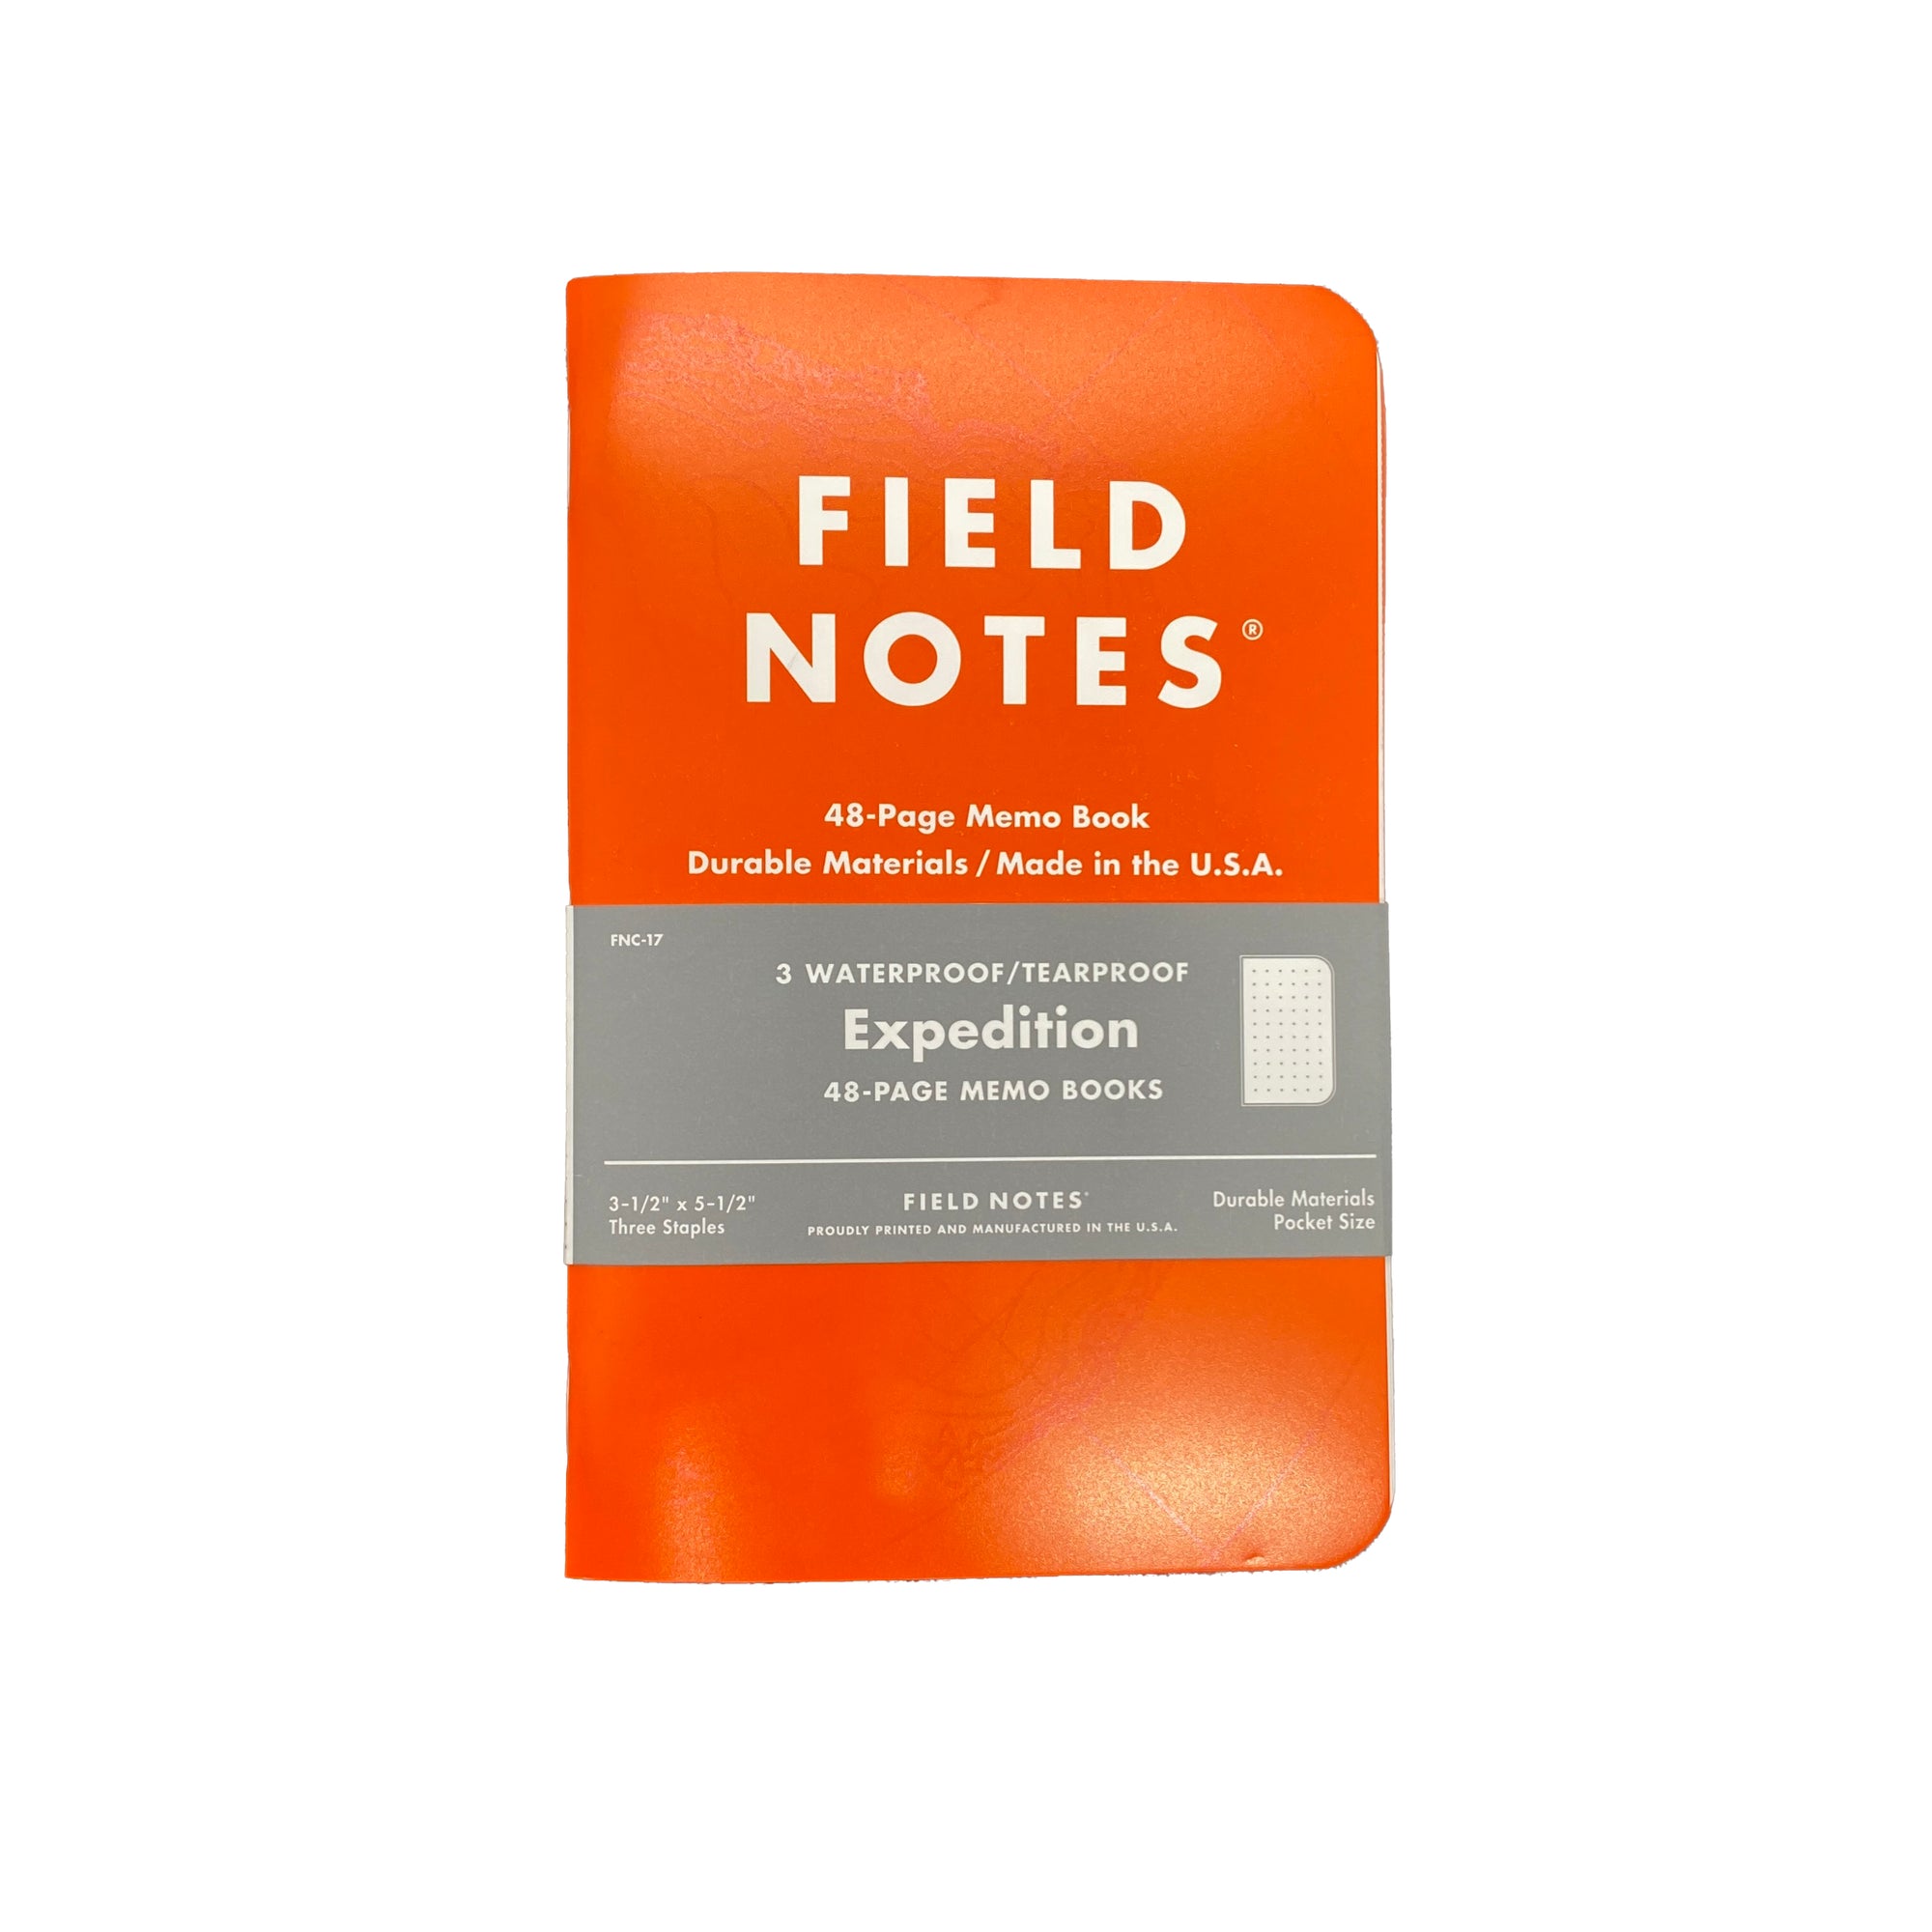 Field Notes: Expedition 3-Pack (waterproof)